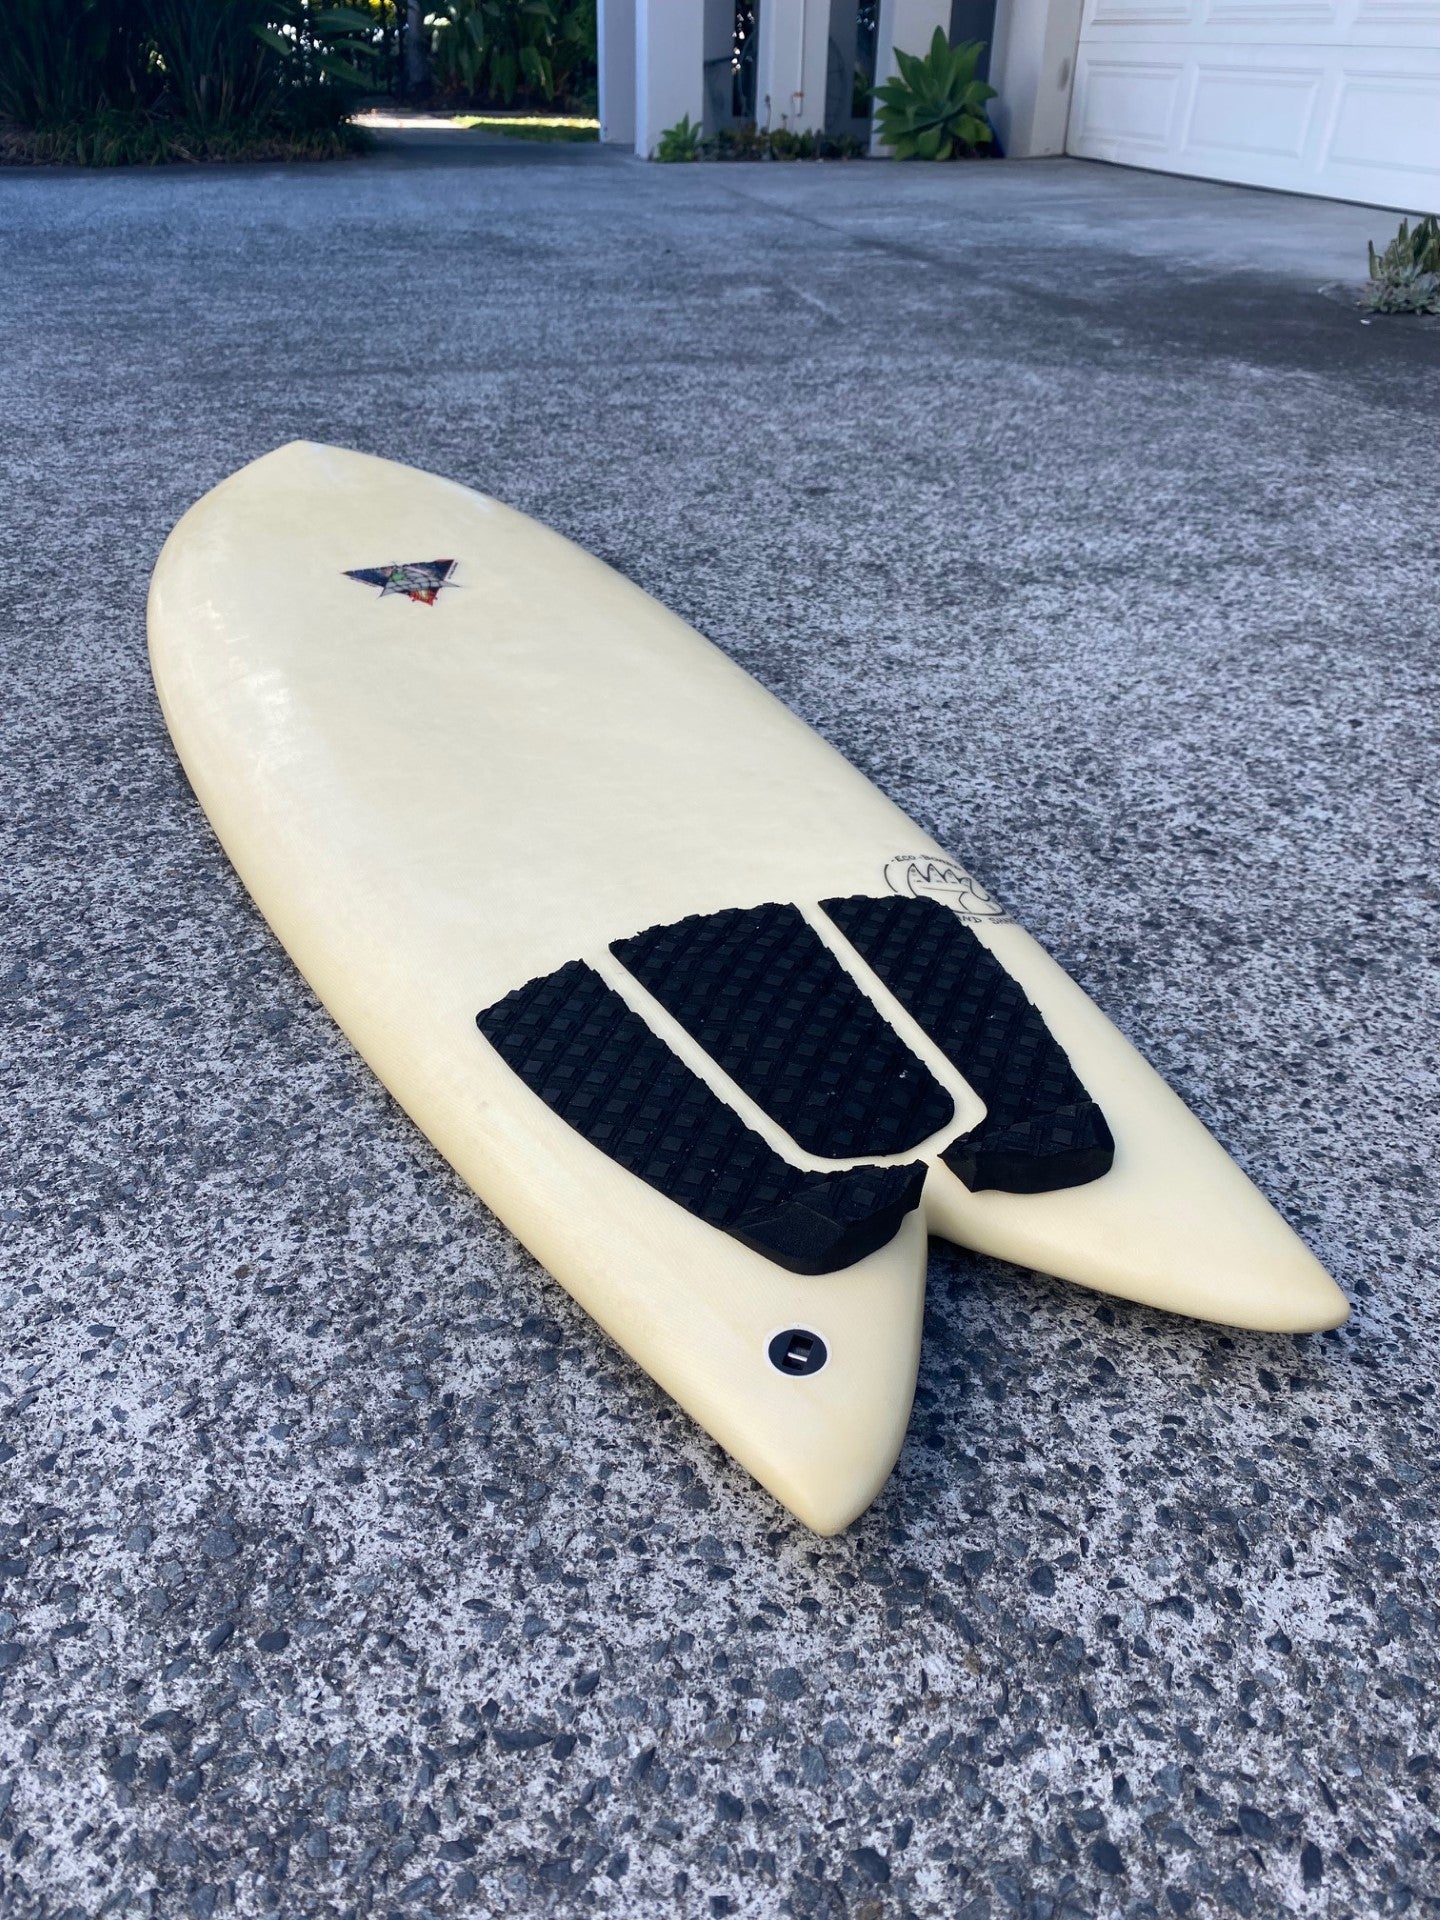 Second Hand-5'7" Fish Rocket Ace Eco Surfboard.